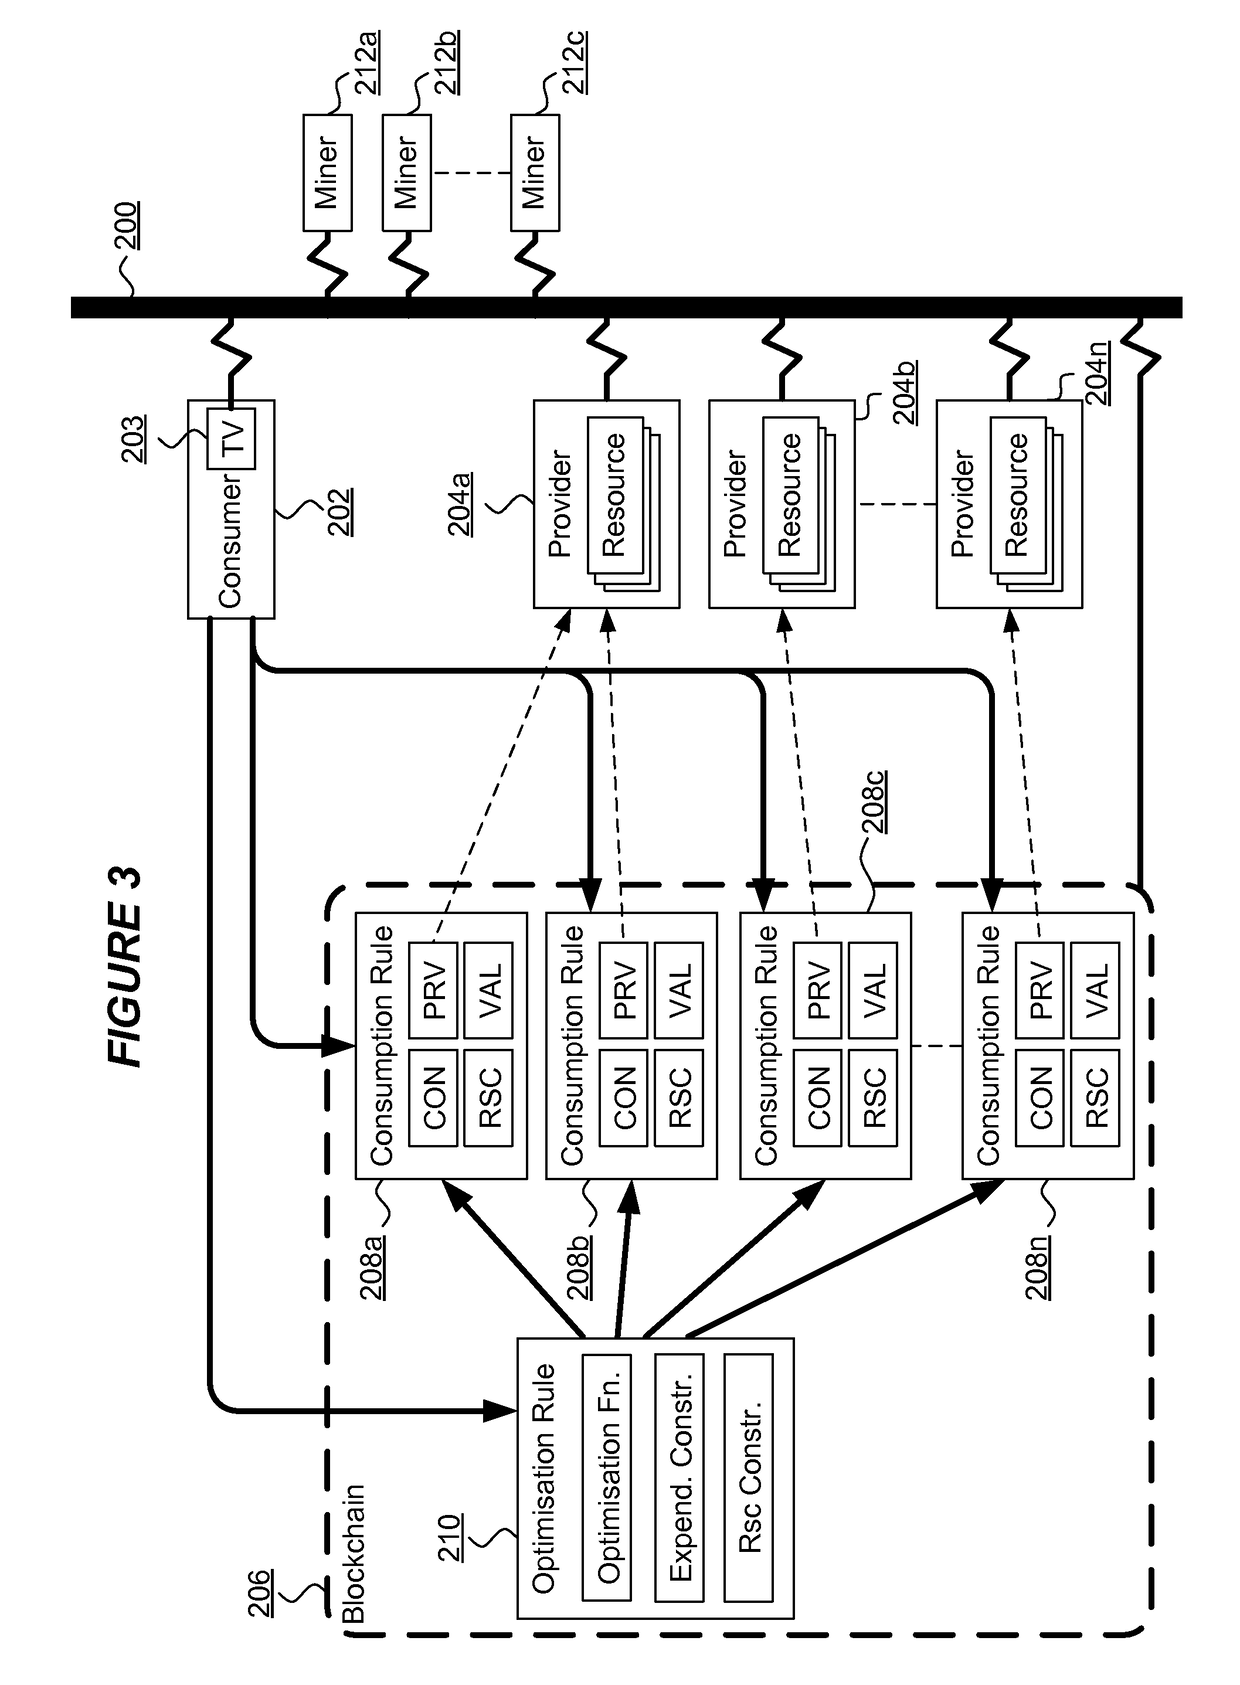 Controlled resource provisioning in distributed computing environments